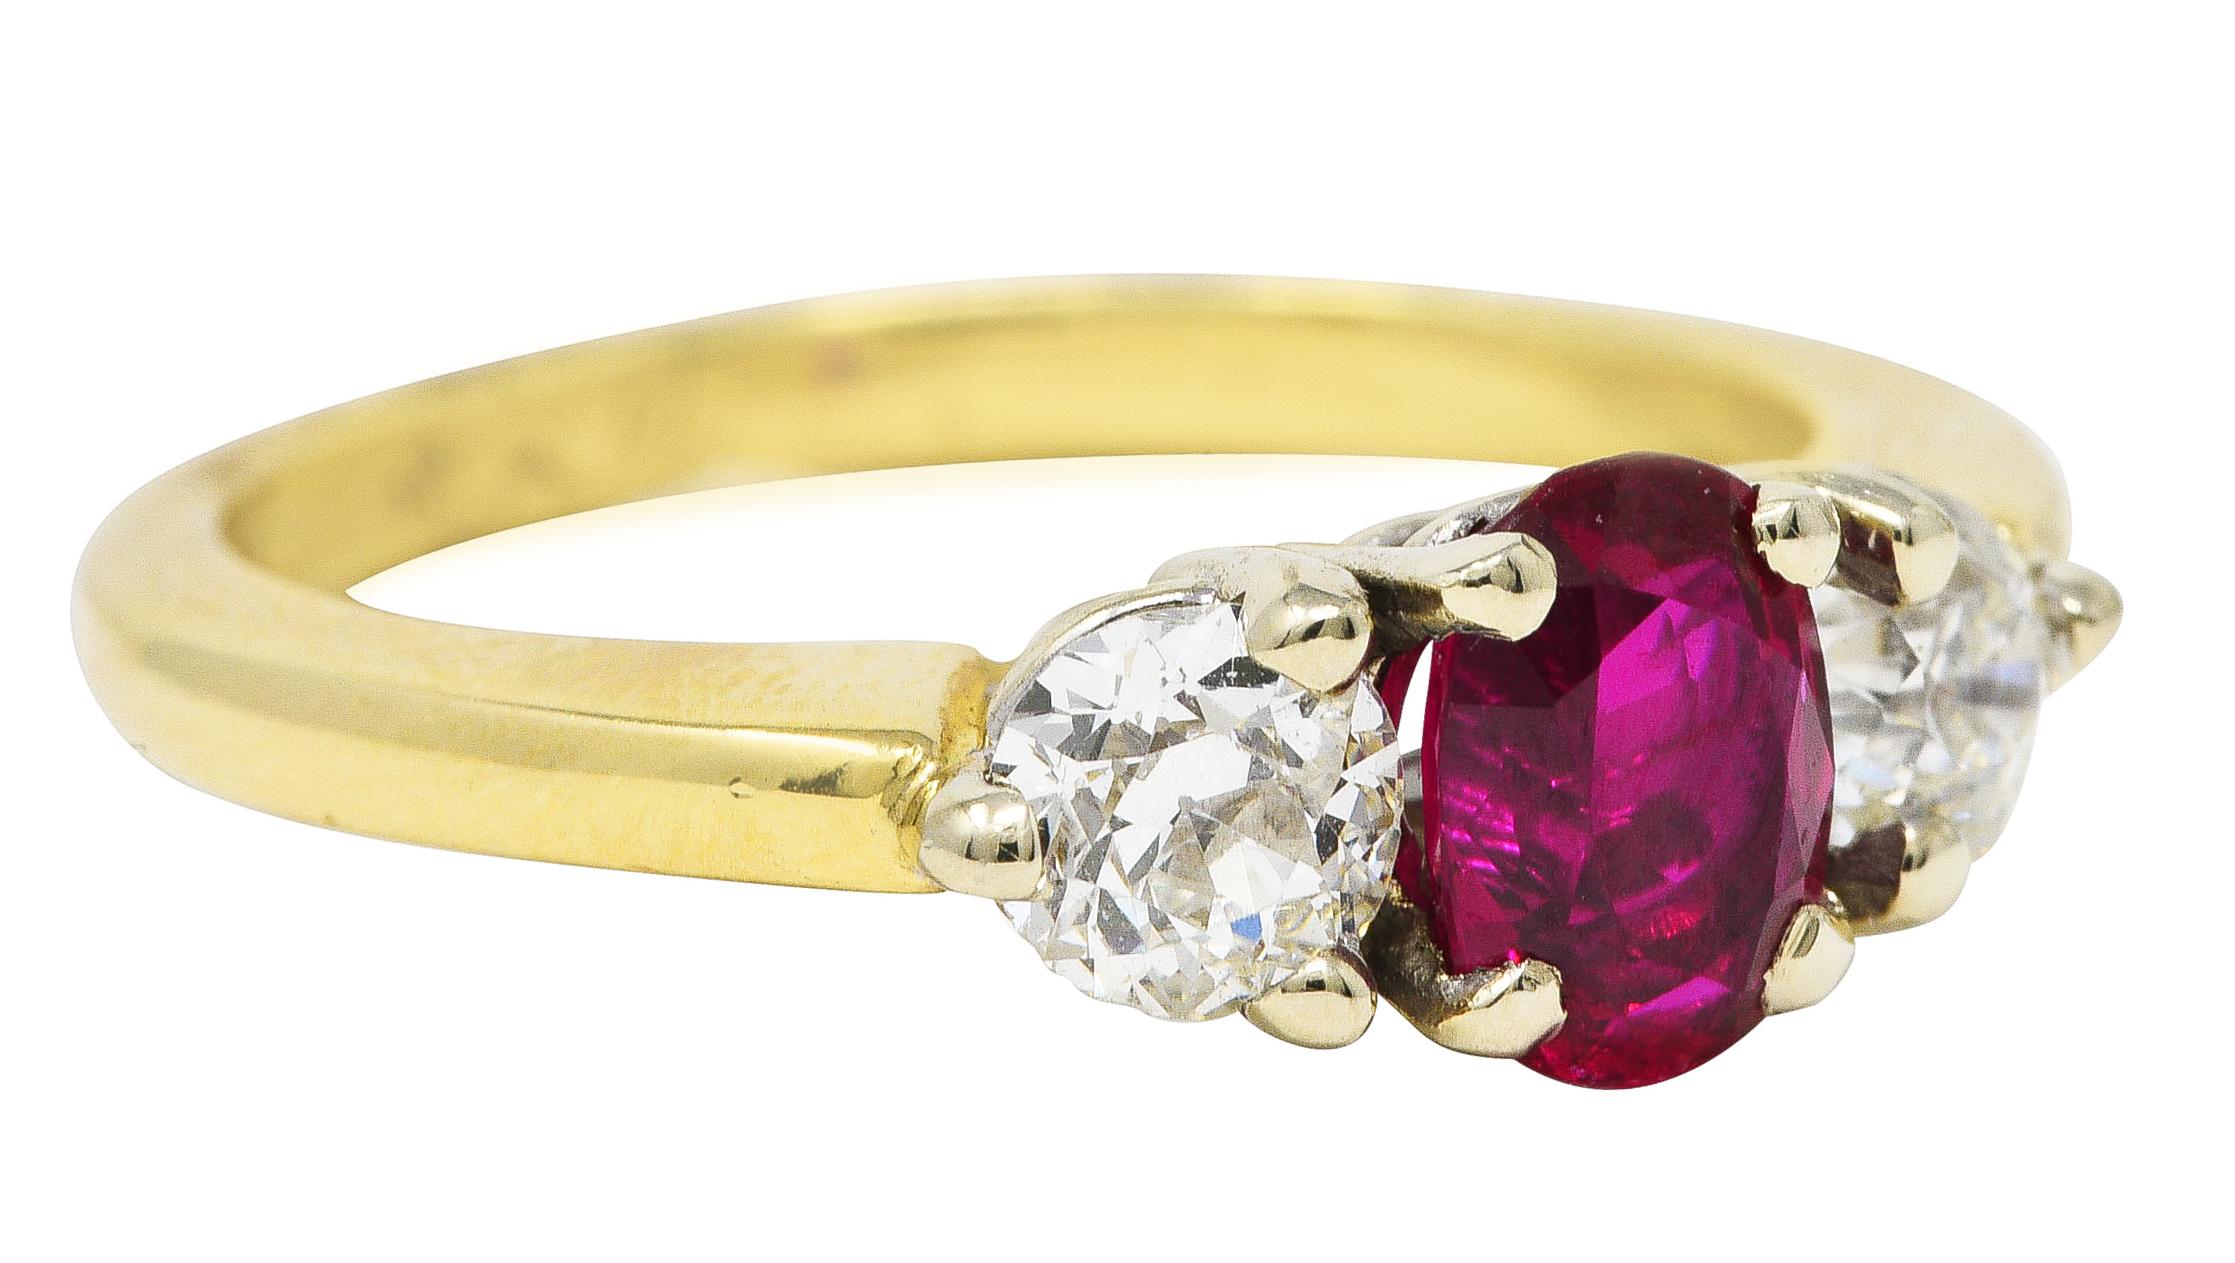 Featuring an oval cut ruby weighing approximately 0.85 carat. Eye clean and pinkish red in color - medium in saturation. Basket set in white gold and flanked by two old European cut diamonds. Weighing collectively approximately 0.65 carat - I/J